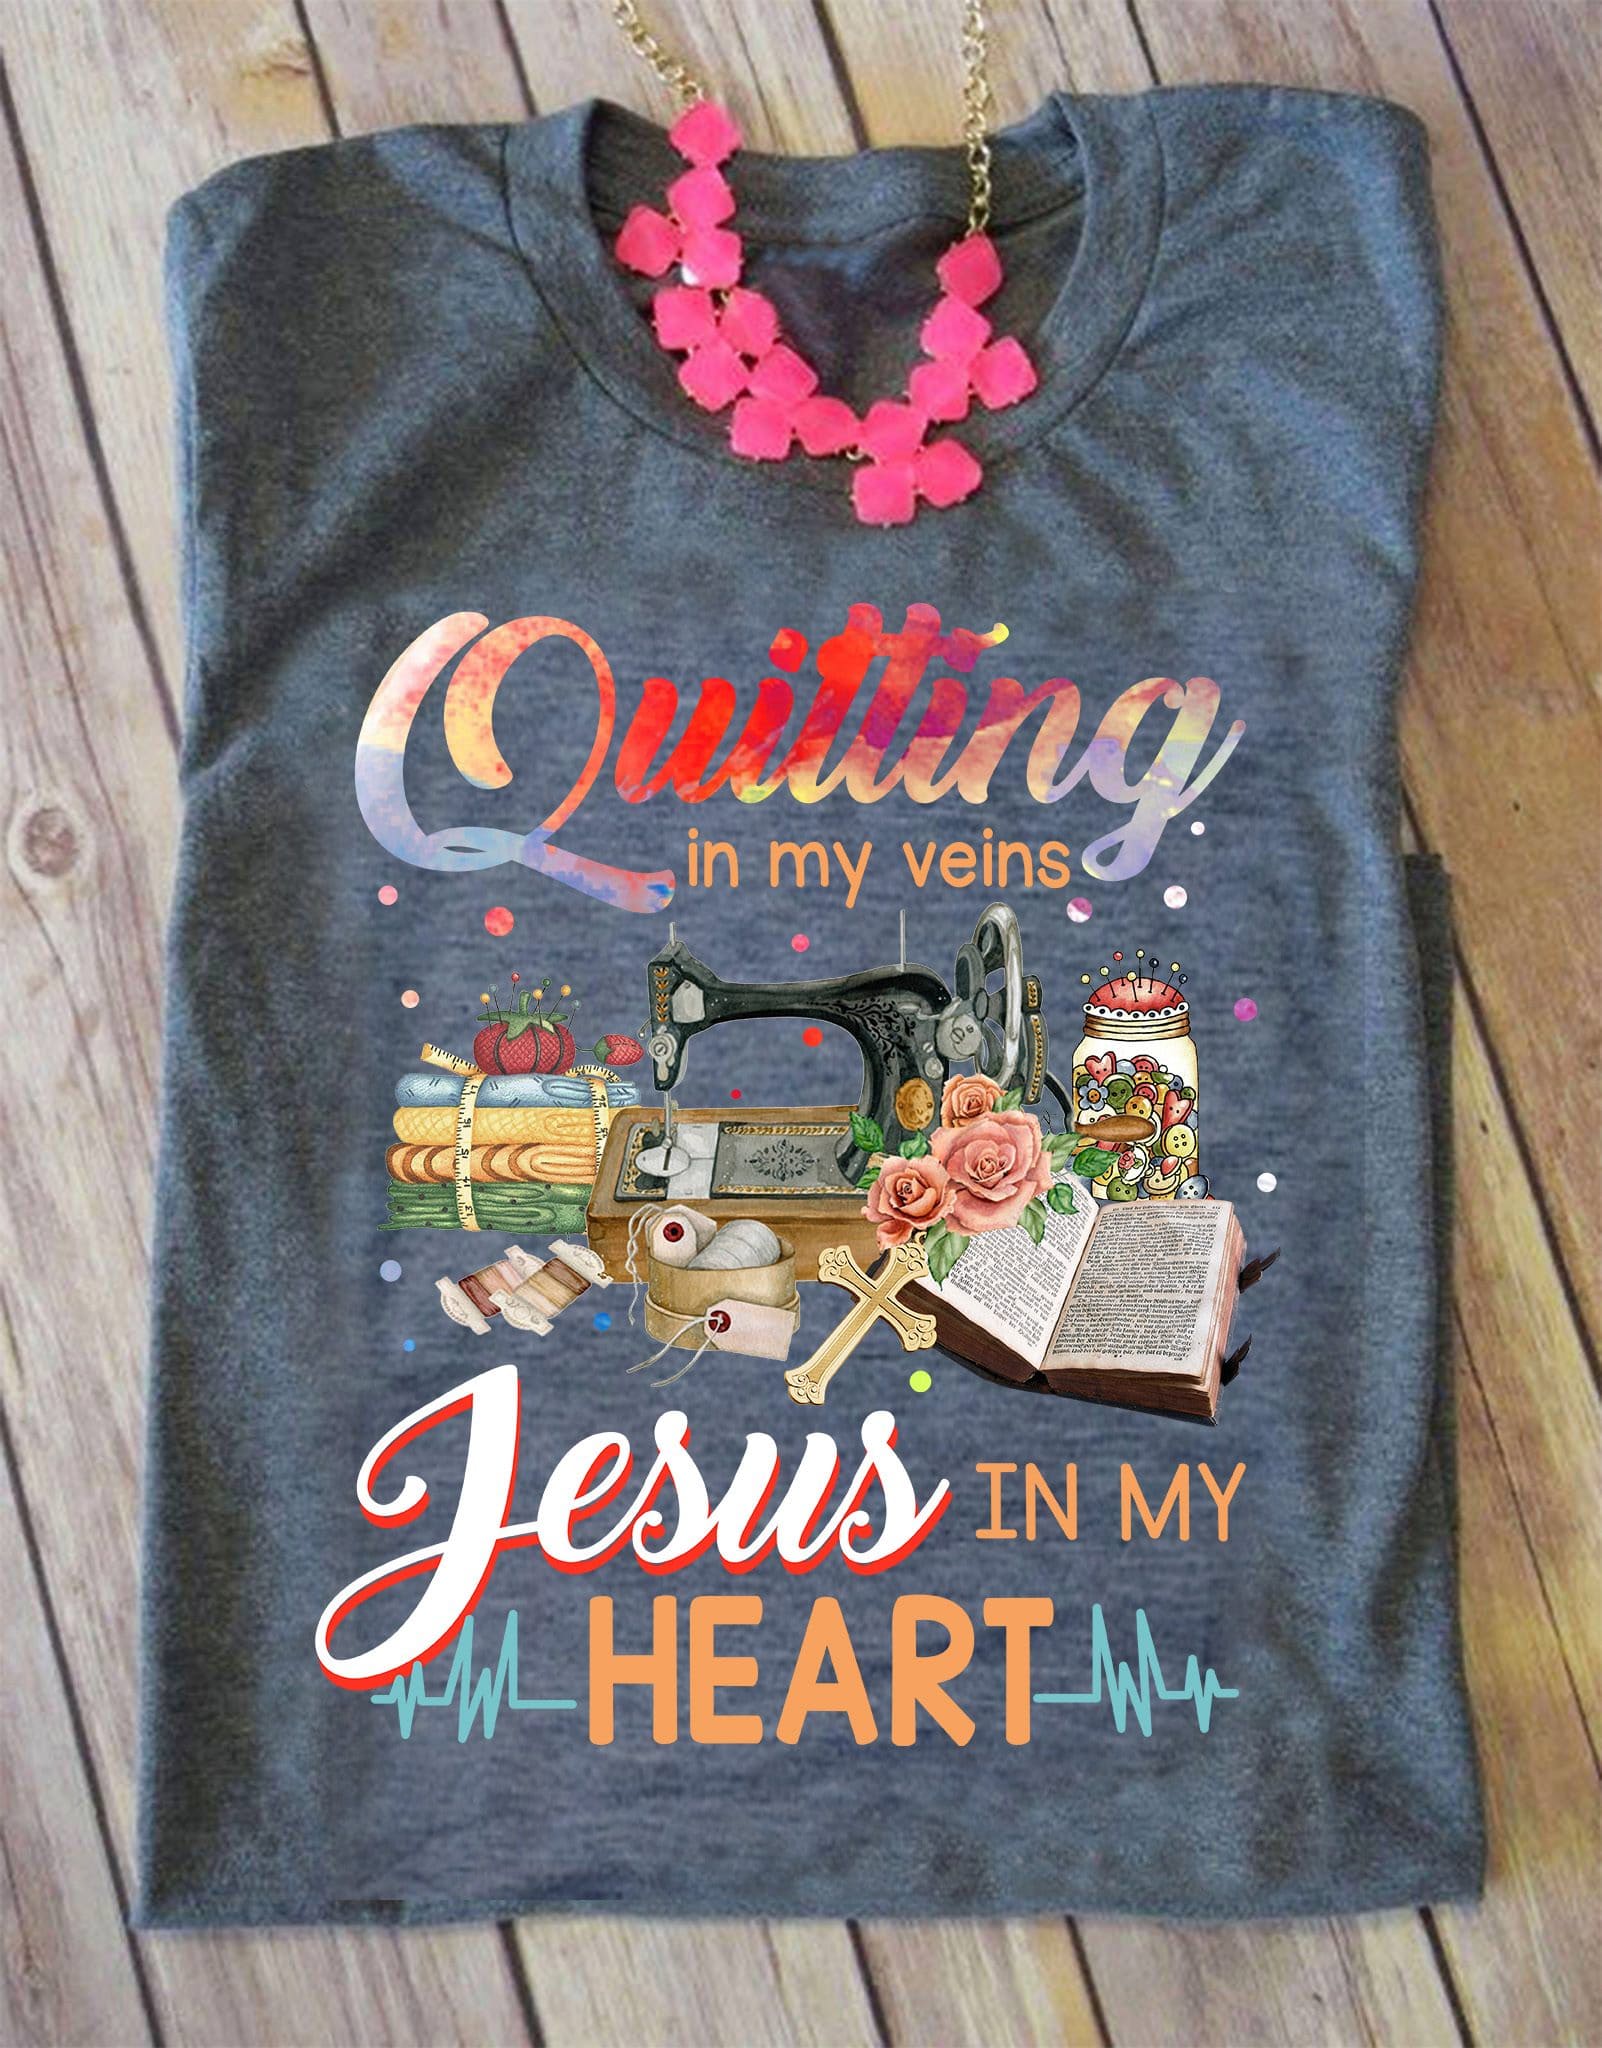 Quilting in my veins, Jesus in my heart - Jesus and Quilting, sewing machine graphic